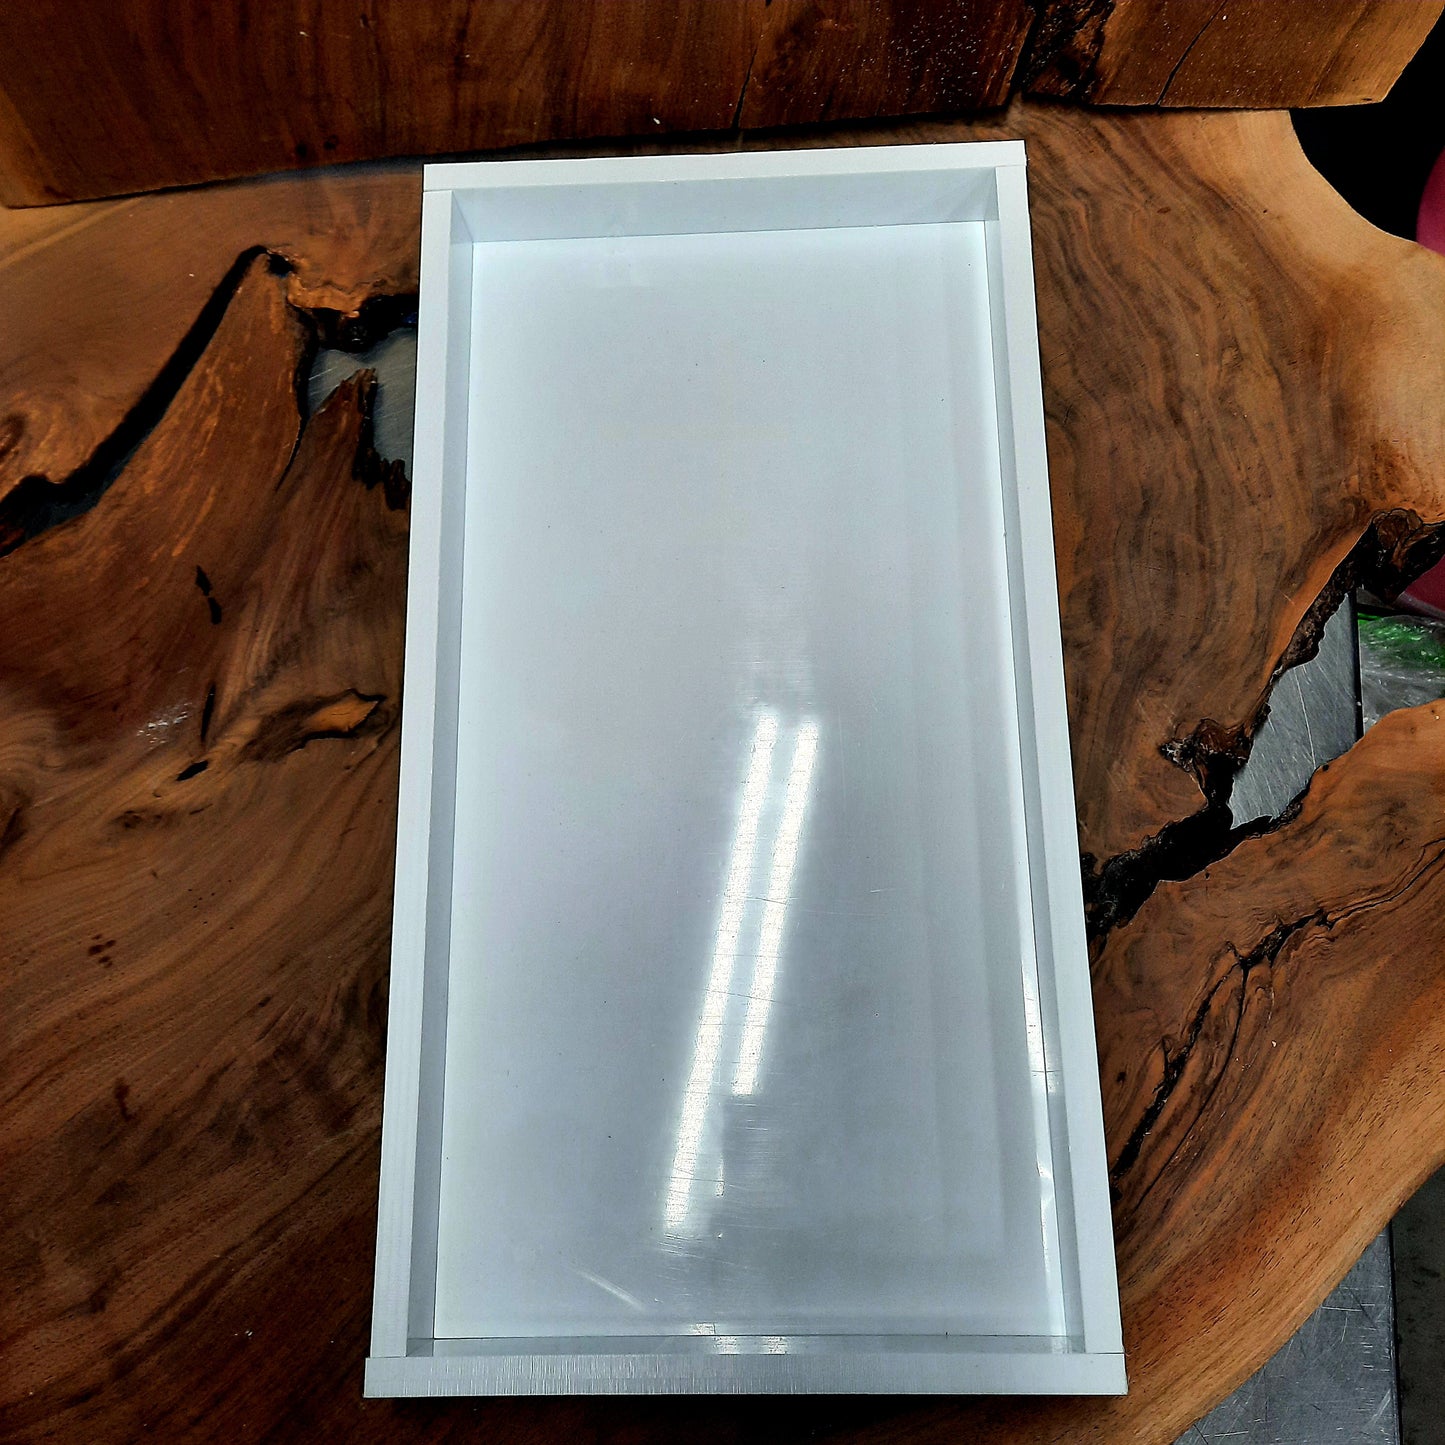 18"x9"x1.5" HDPE Mold for Cribbage or Charcuterie boards